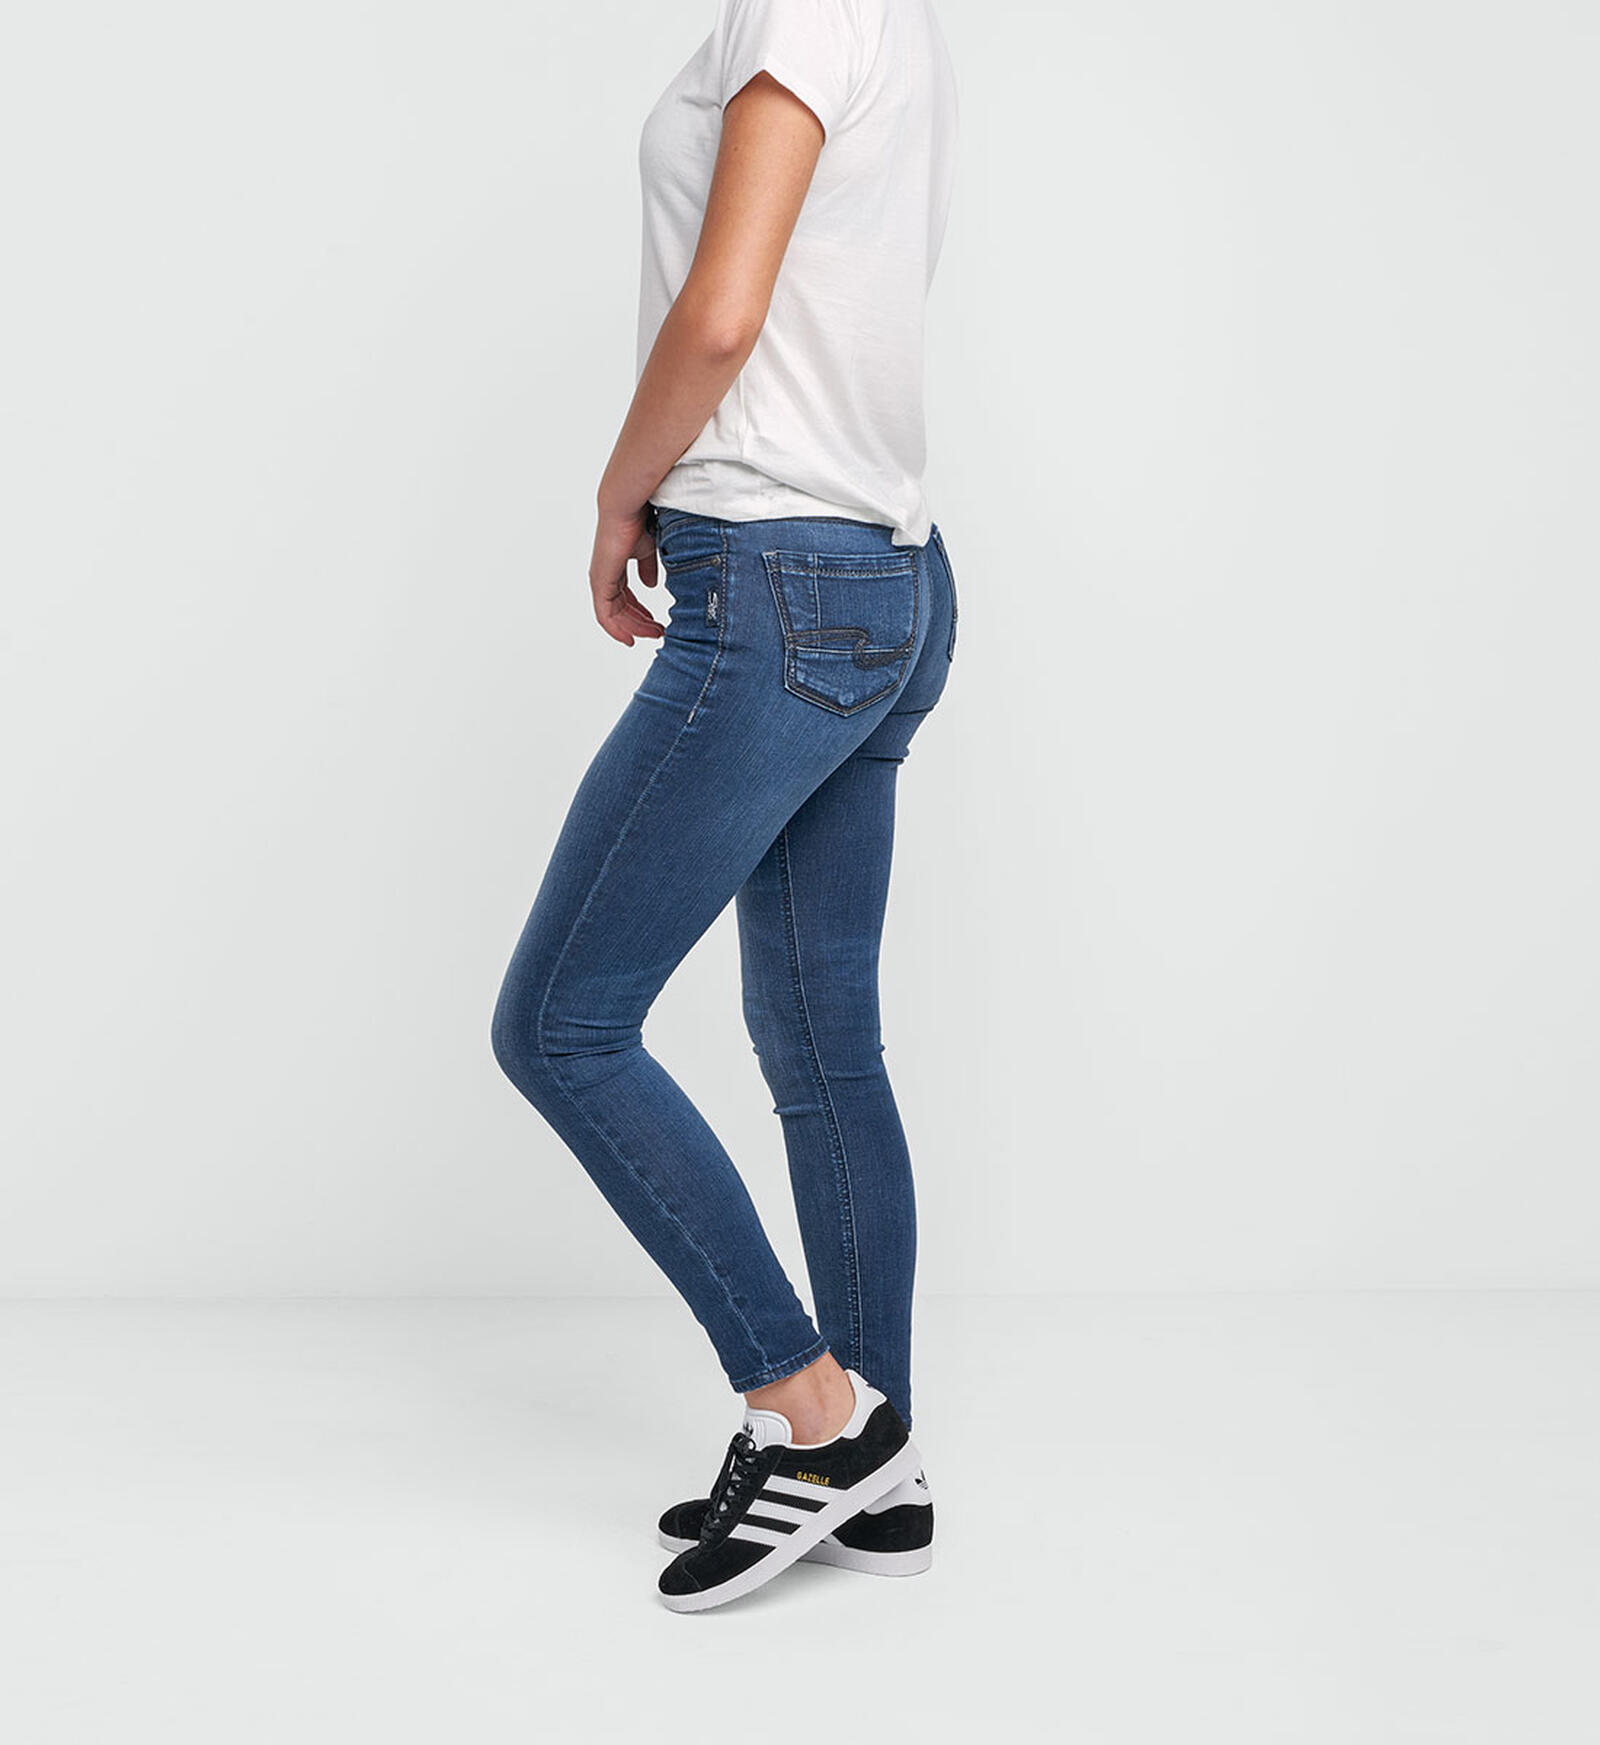 Buy Aiko Super Skinny Dark Wash for USD 79.00 | Silver Jeans US New